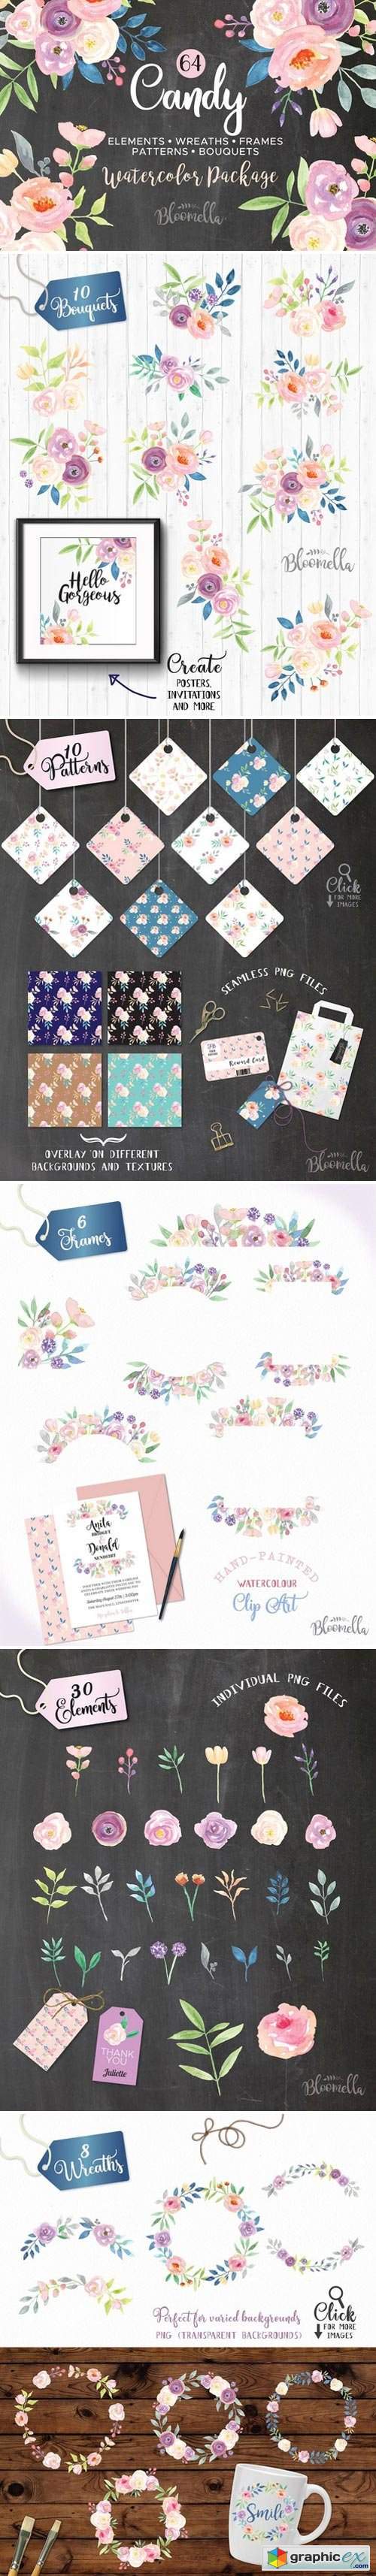 Candy Pastel Watercolor Flower Pack